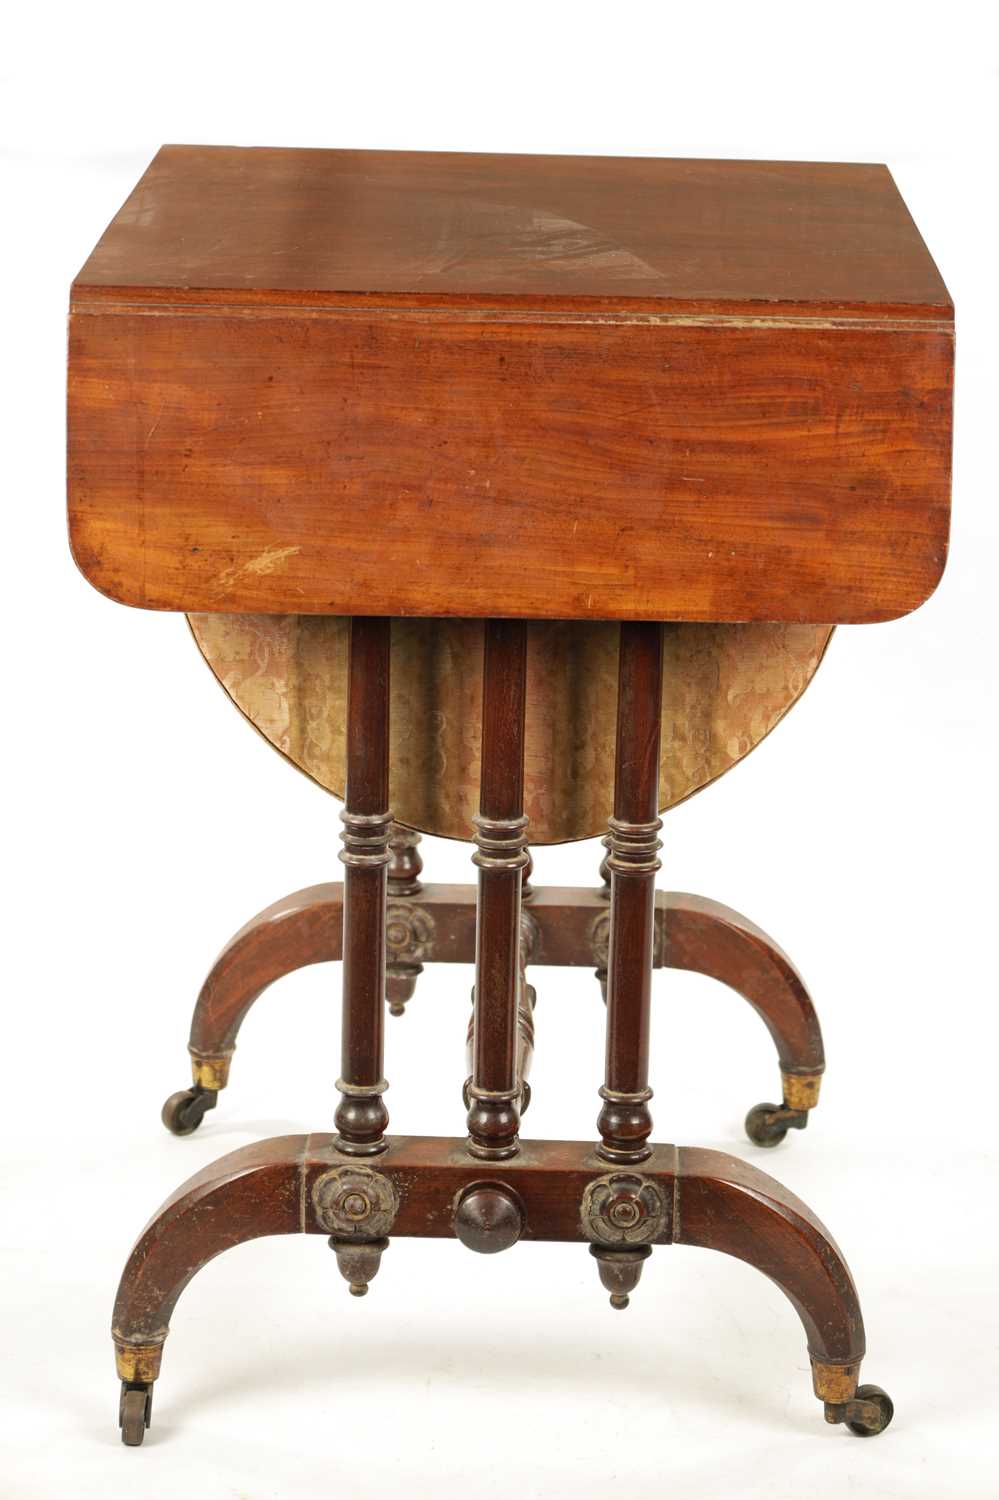 A 19TH CENTURY MAHOGANY FOLD DOWN WORK TABLE IN THE MANNER OR GILLOWS - Image 8 of 8